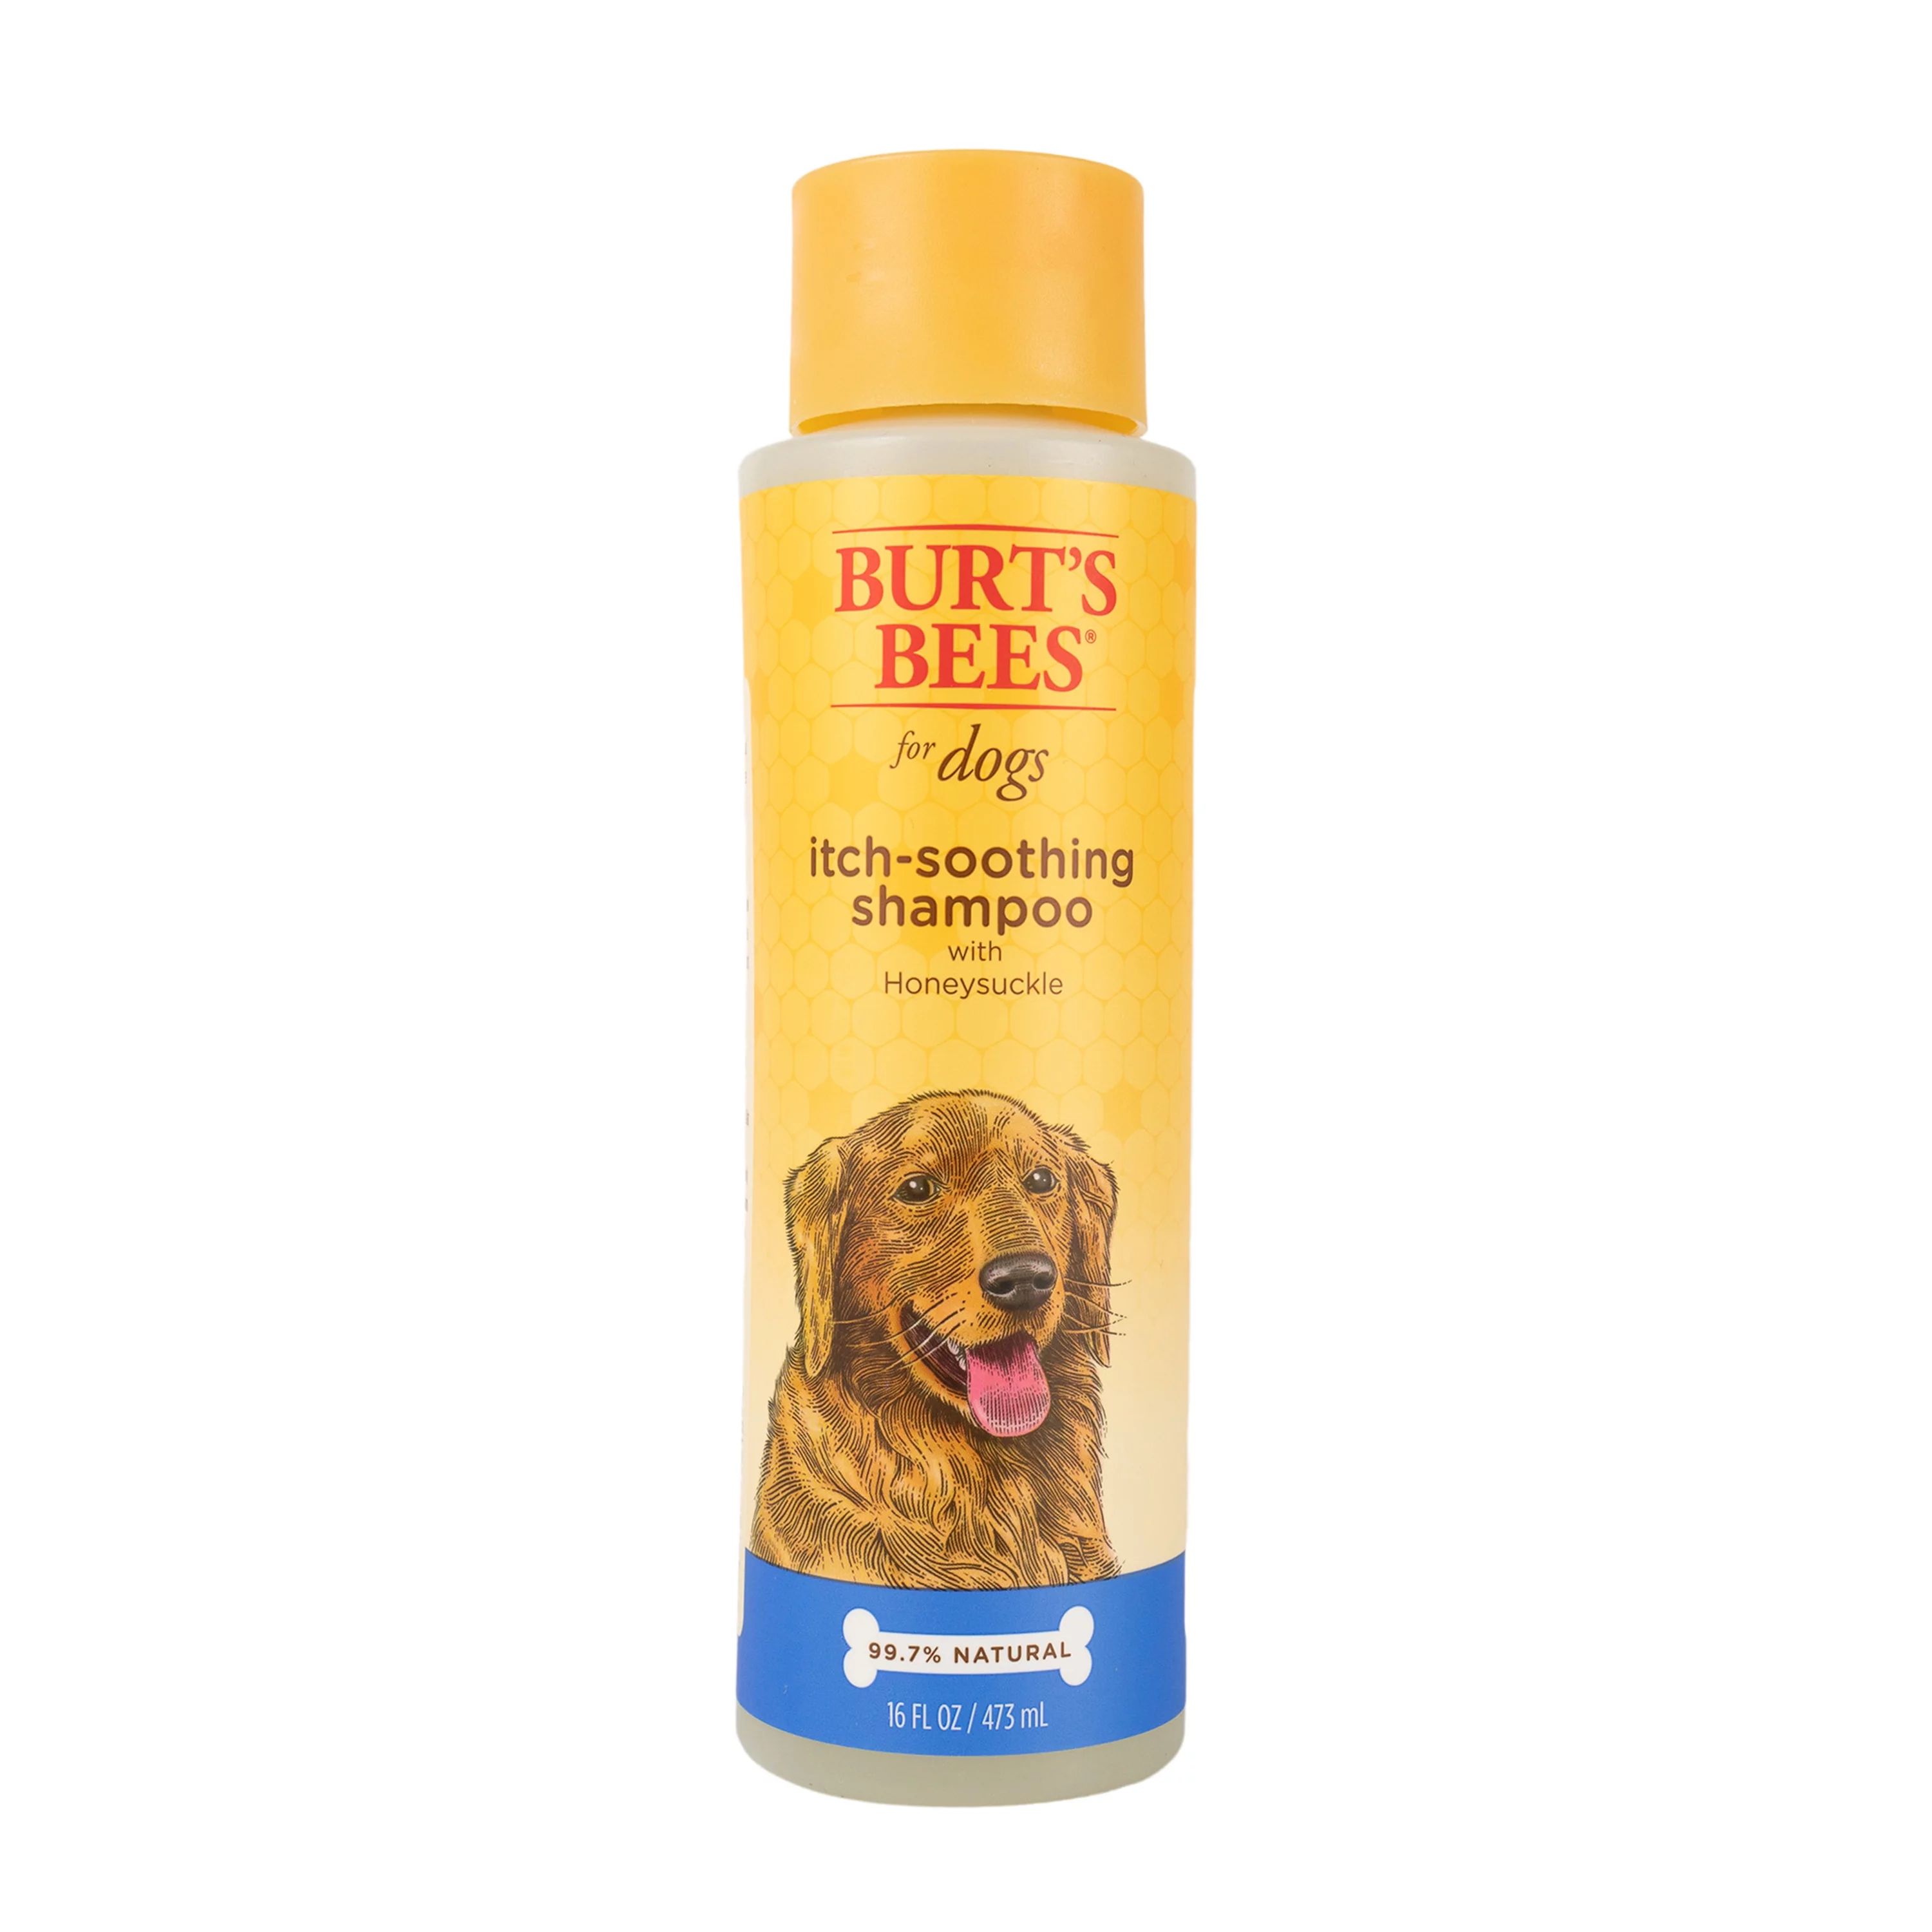 Burt's Bees Natural Pet Care Itch Soothing Shampoo with Honeysuckle for Dogs, 16 oz. | Walmart (US)